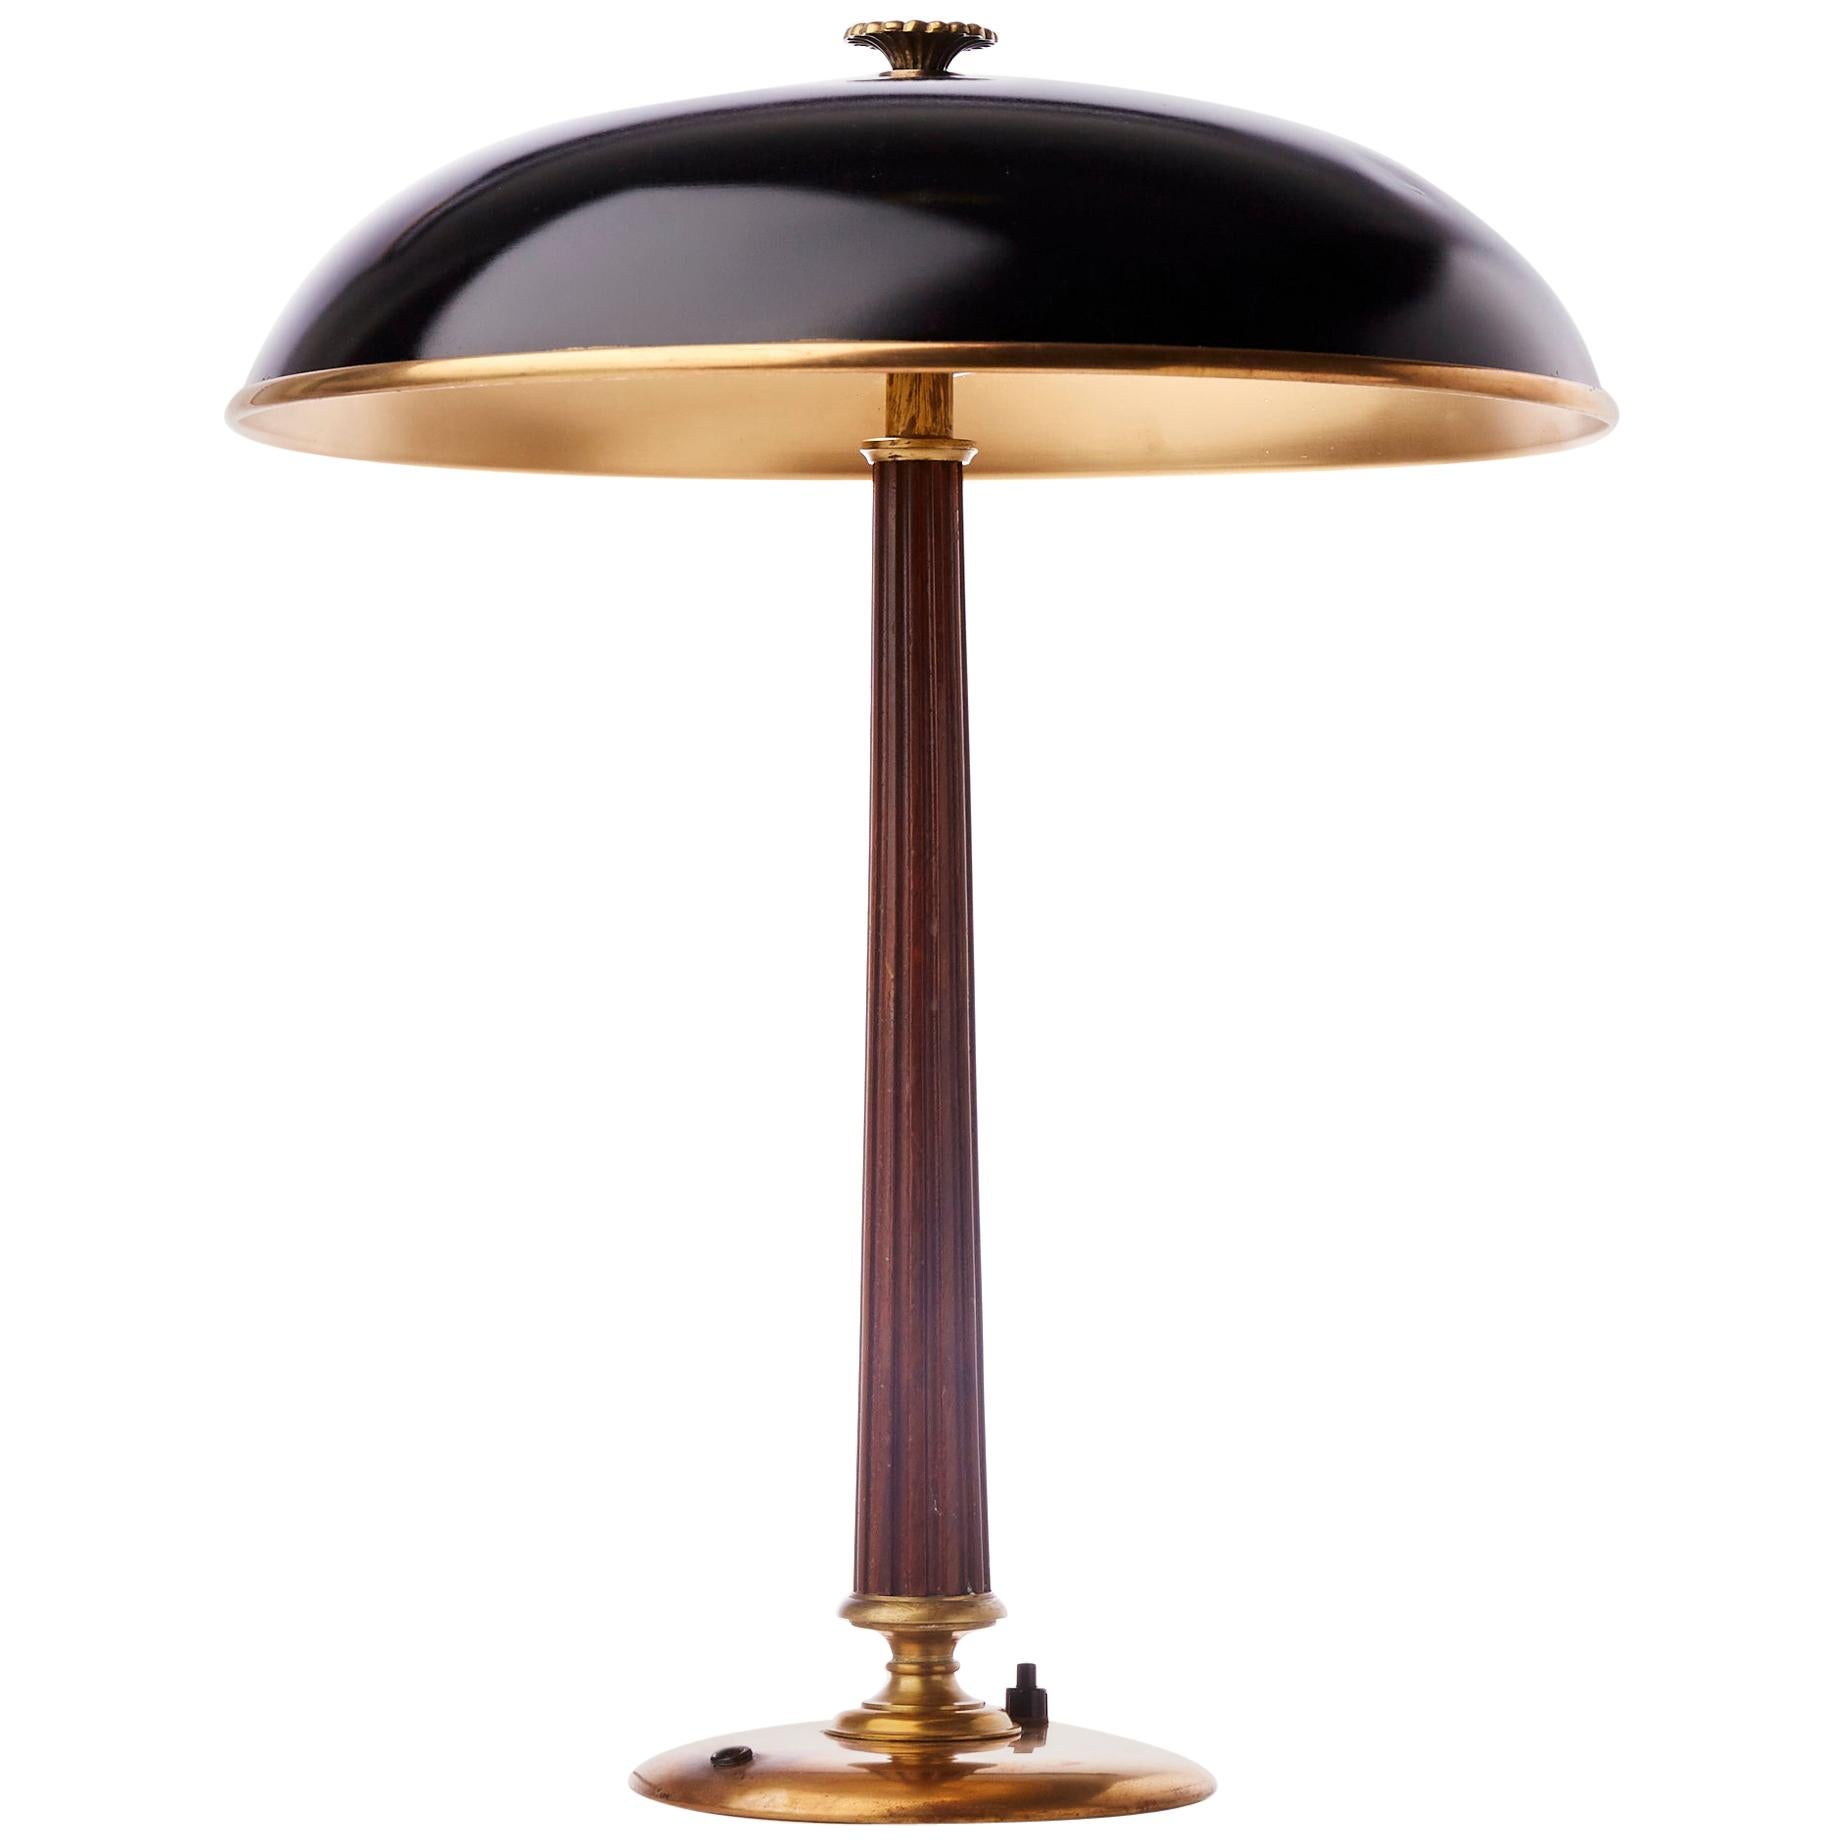 Brass and Mahogany Table Lamp by Böhlmarks, Sweden, 1940